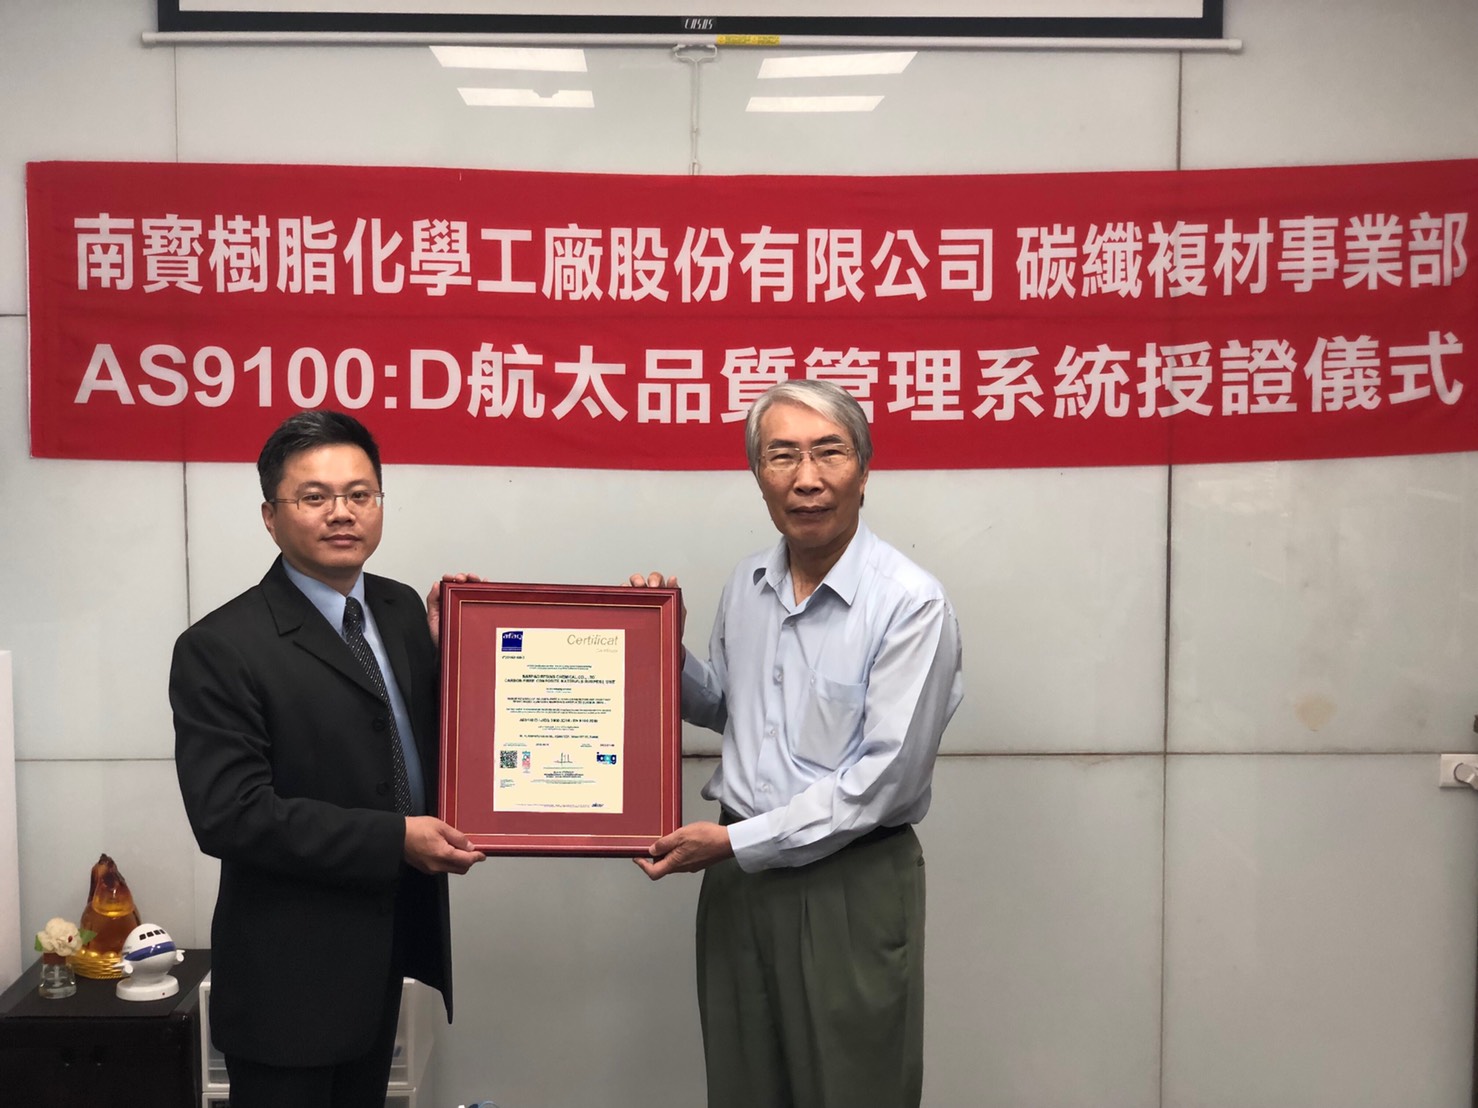 Nan Pao certificated with AS9100:D Quality Management Systems standard